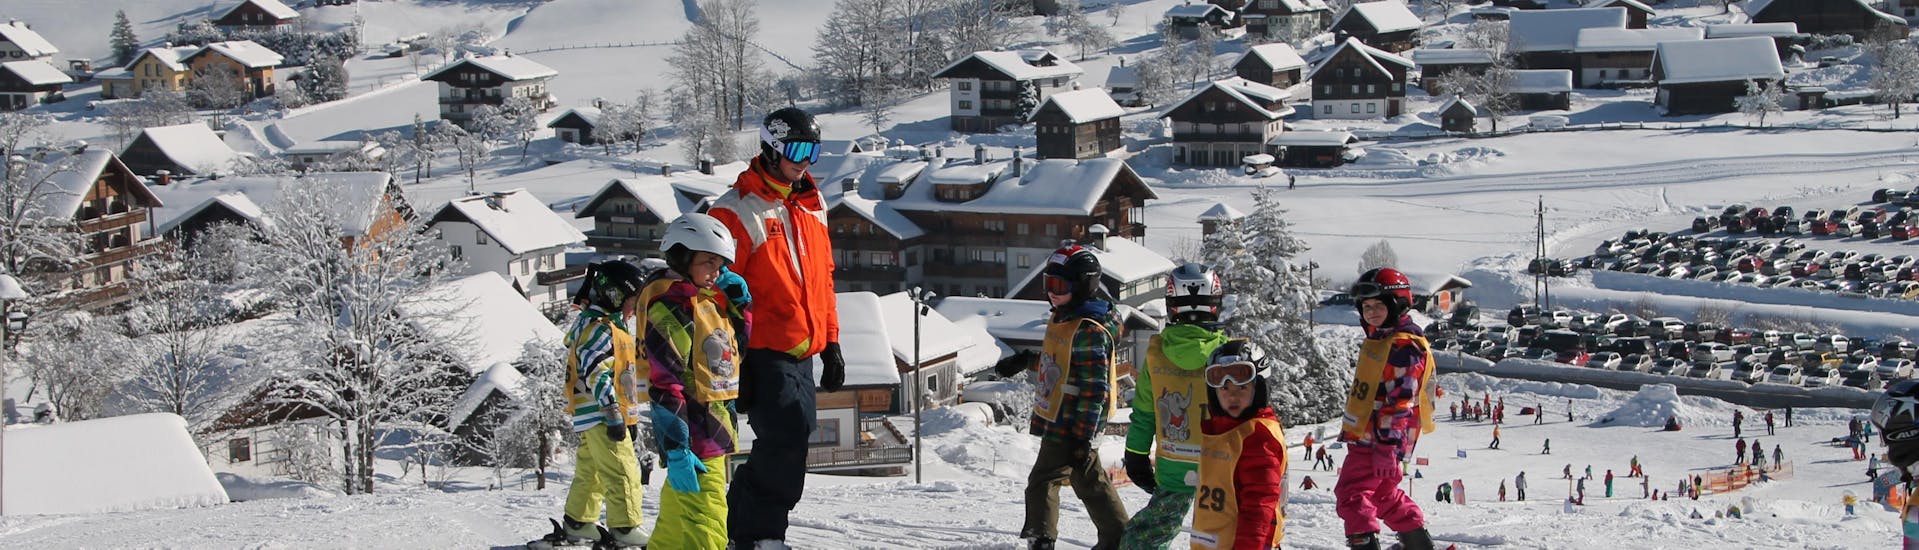 Ski Instructor Private for Kids - All Ages with Skischule Gosau - Hero image